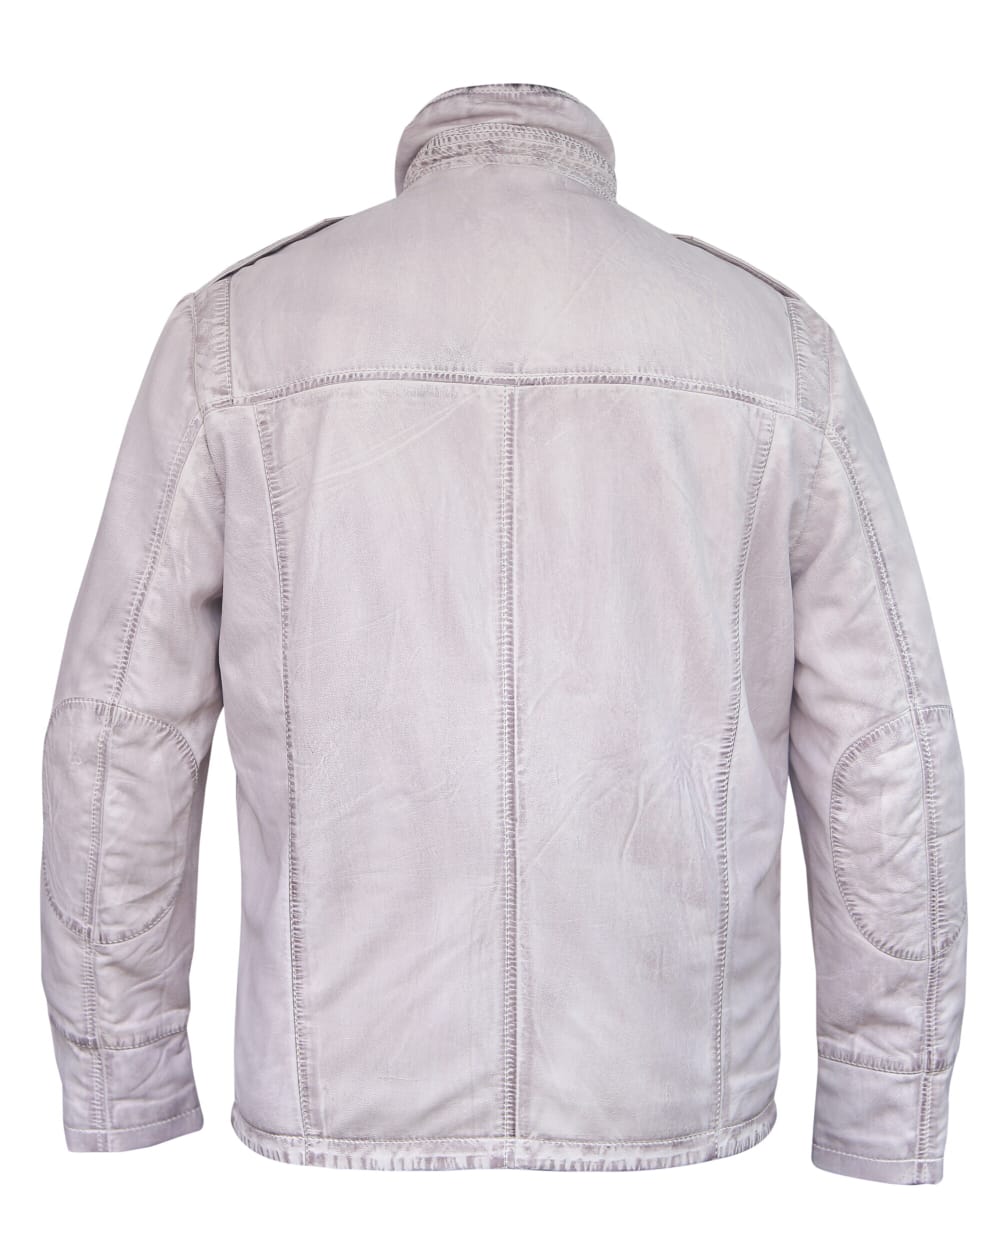 Shop White Motorcycle Leather Biker Jacket - Kmax Leather